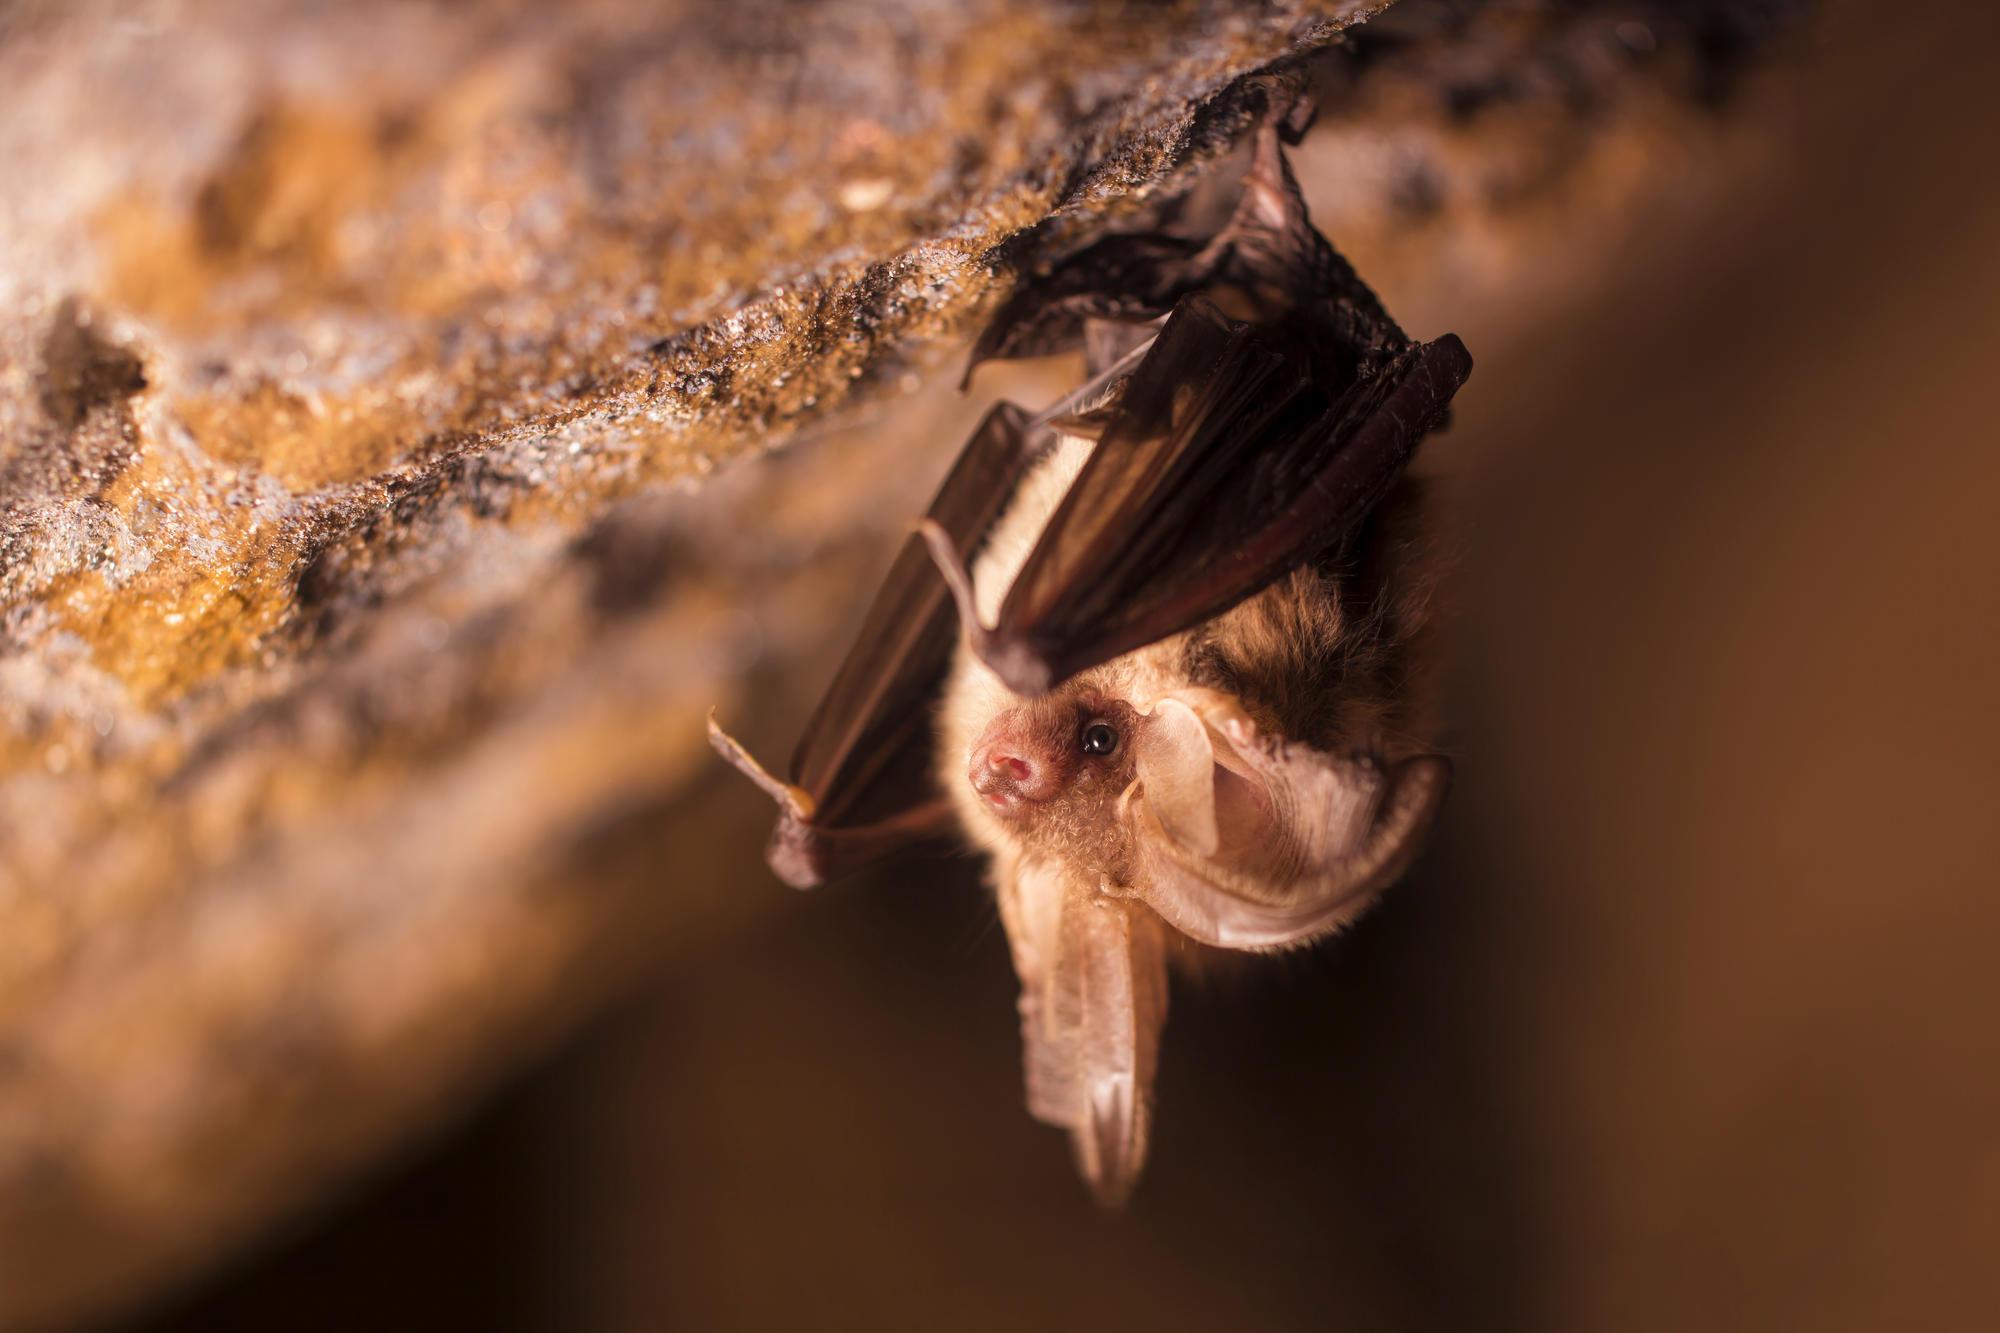 A brown, long-eared bat clinging upside-down to a rocky structure.